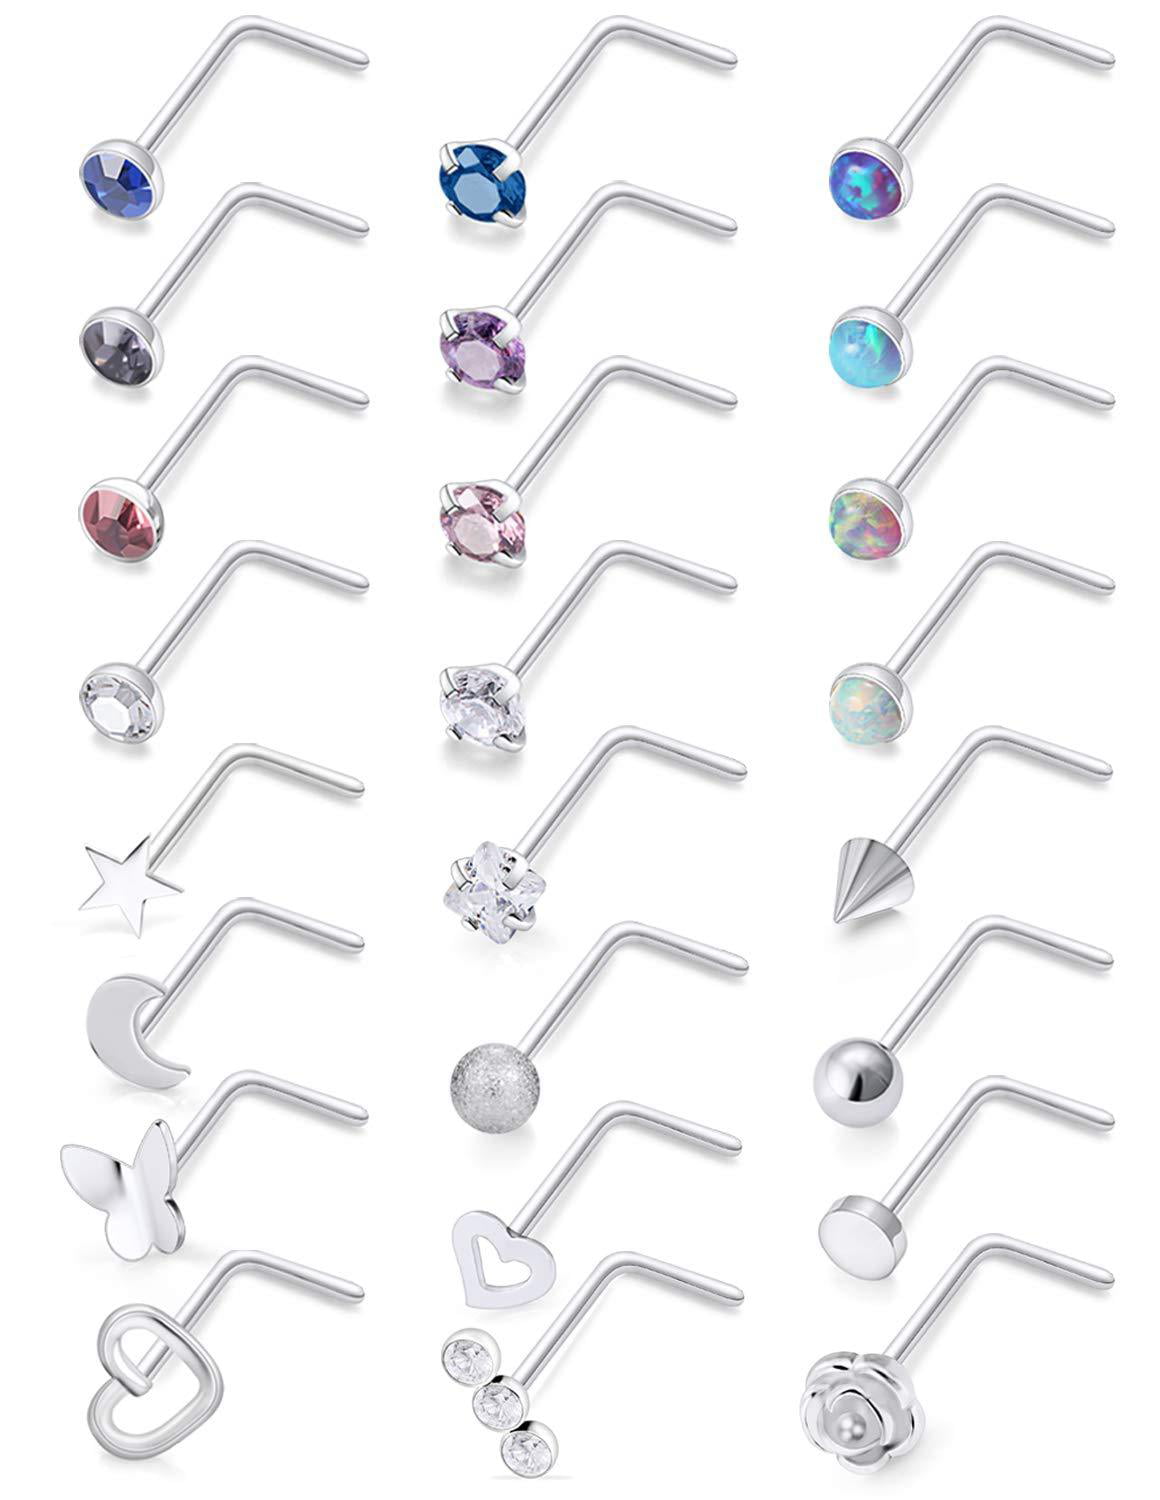 7 Pcs Pack of Assorted 316L Surgical Steel 2mm CZ Nose Bone Studs 